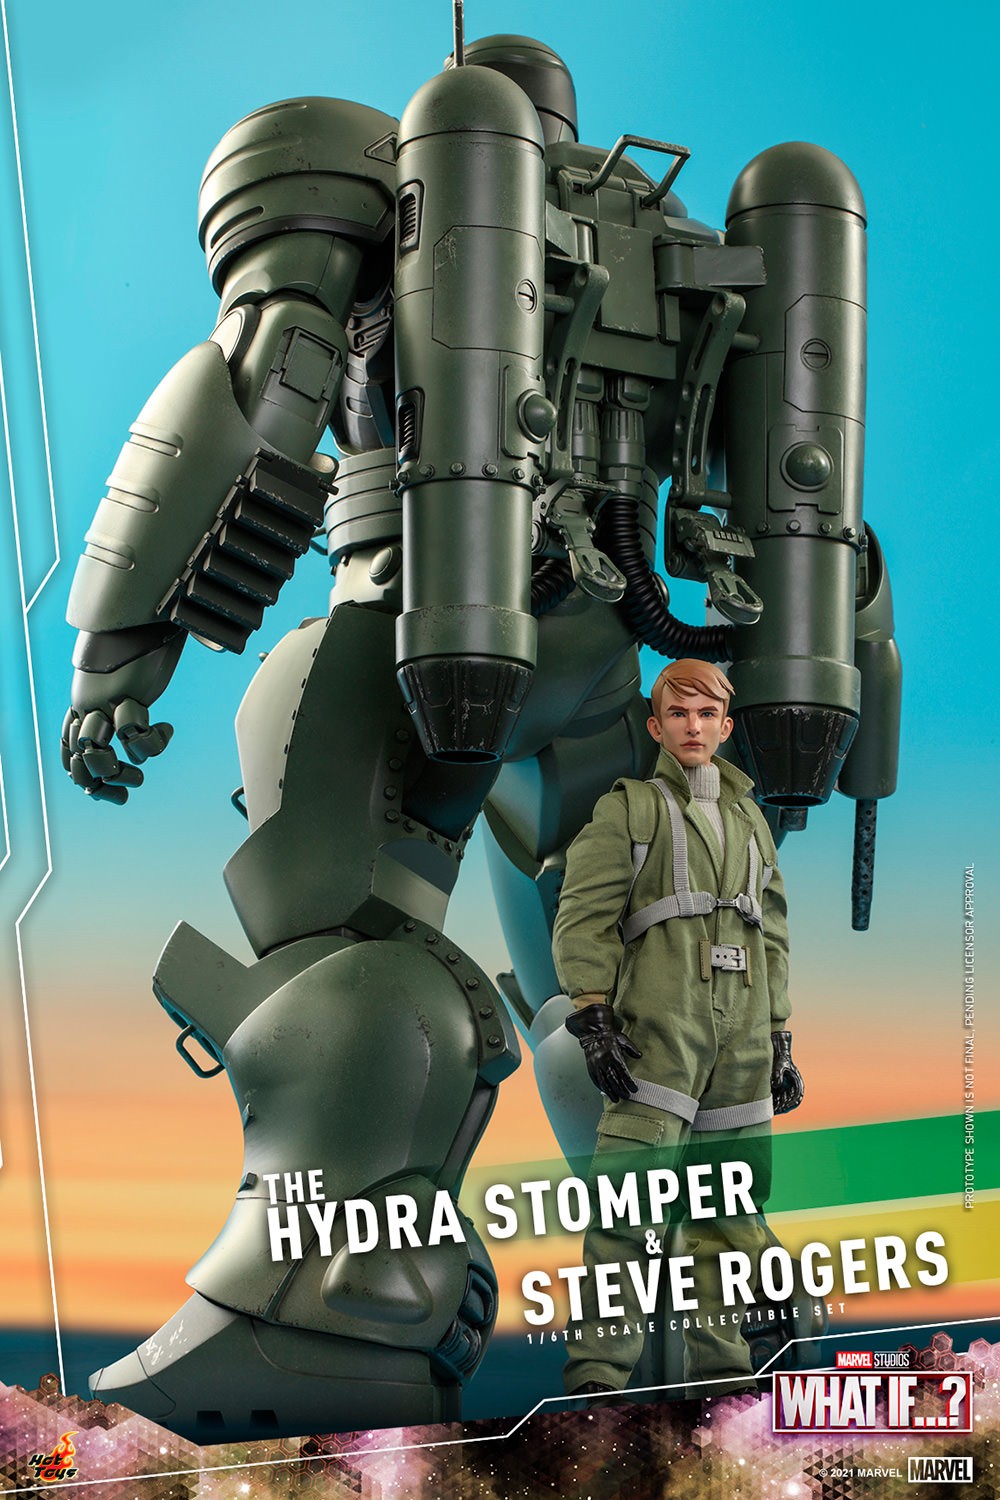 Steve Rogers and The Hydra Stomper (Prototype Shown) View 6